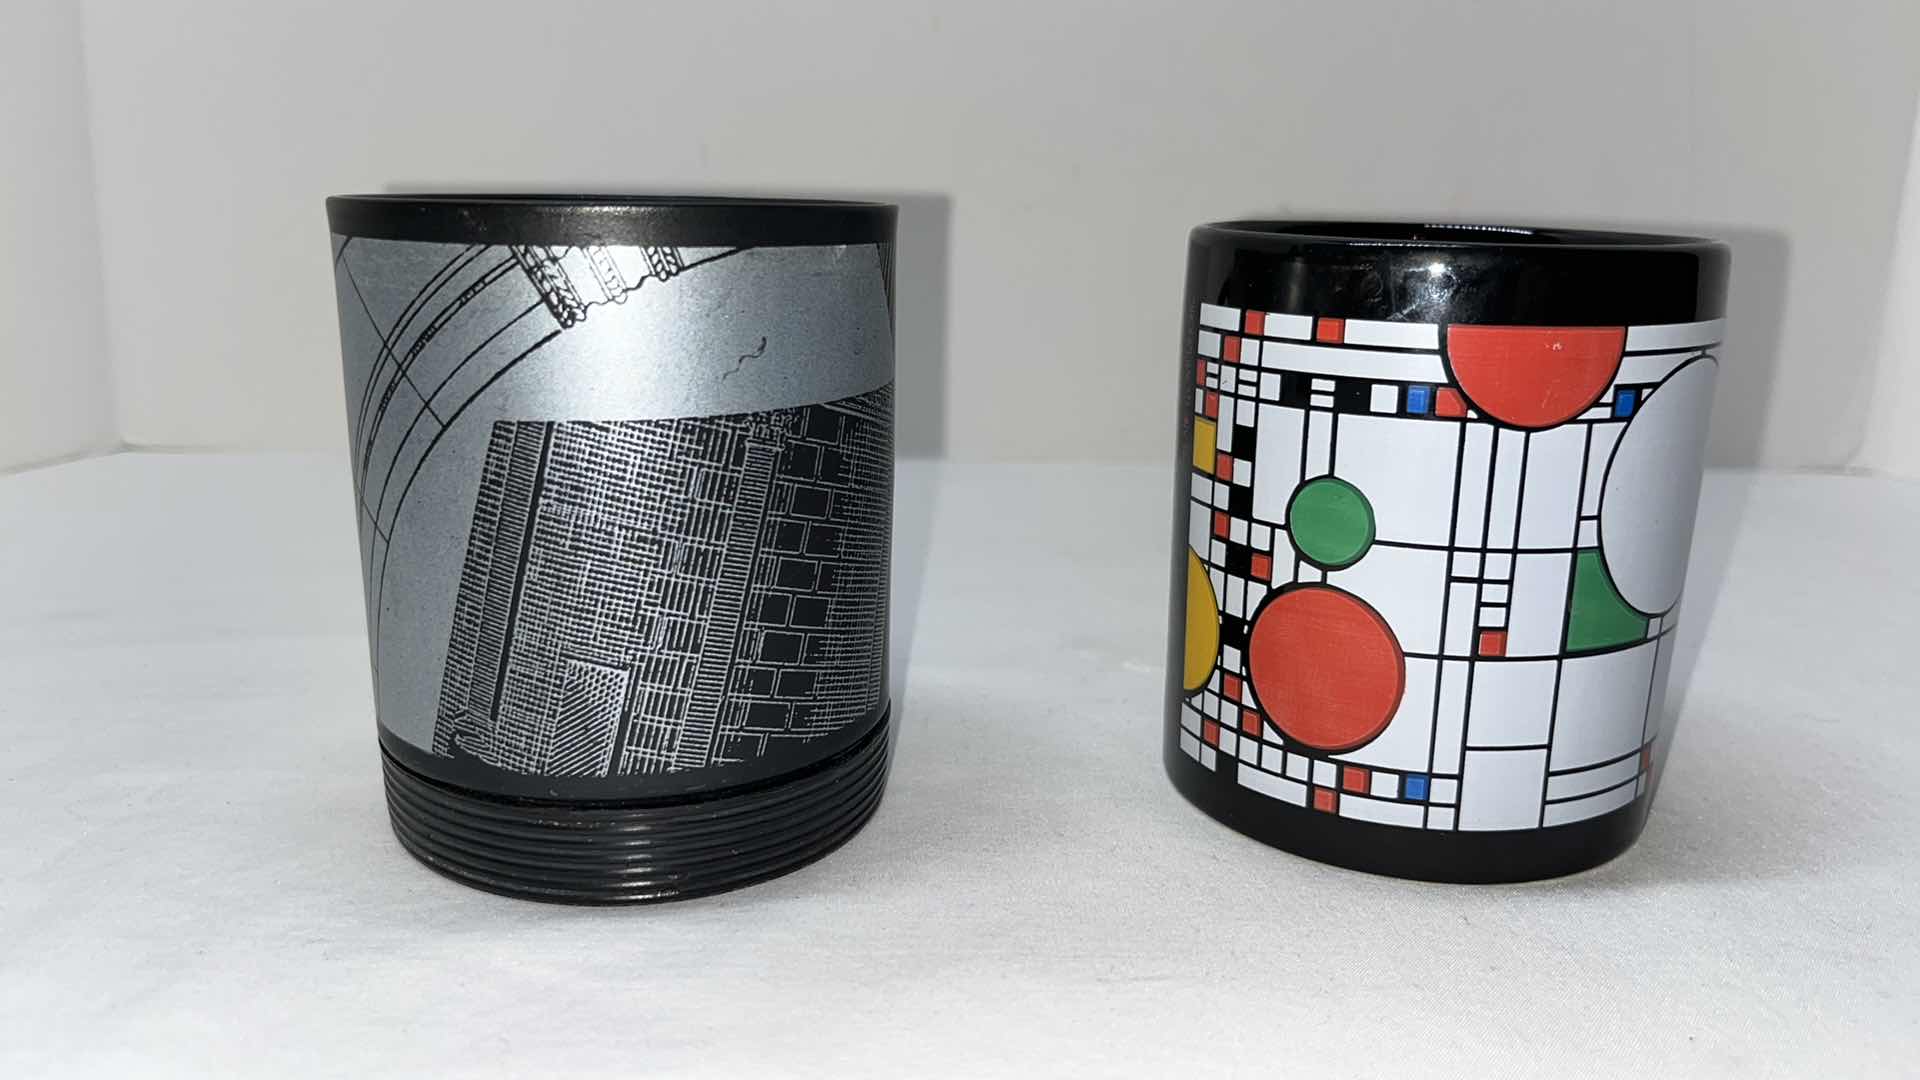 Photo 2 of 2 PC SPECIALTY COFFEE MUGS, 
ANDREA PALLADIO 16TH CENTURY ITALIAN ARCHITECT & NATIONAL CENTER FOR THE STUDY OF FRANK LLOYD WRIGHT